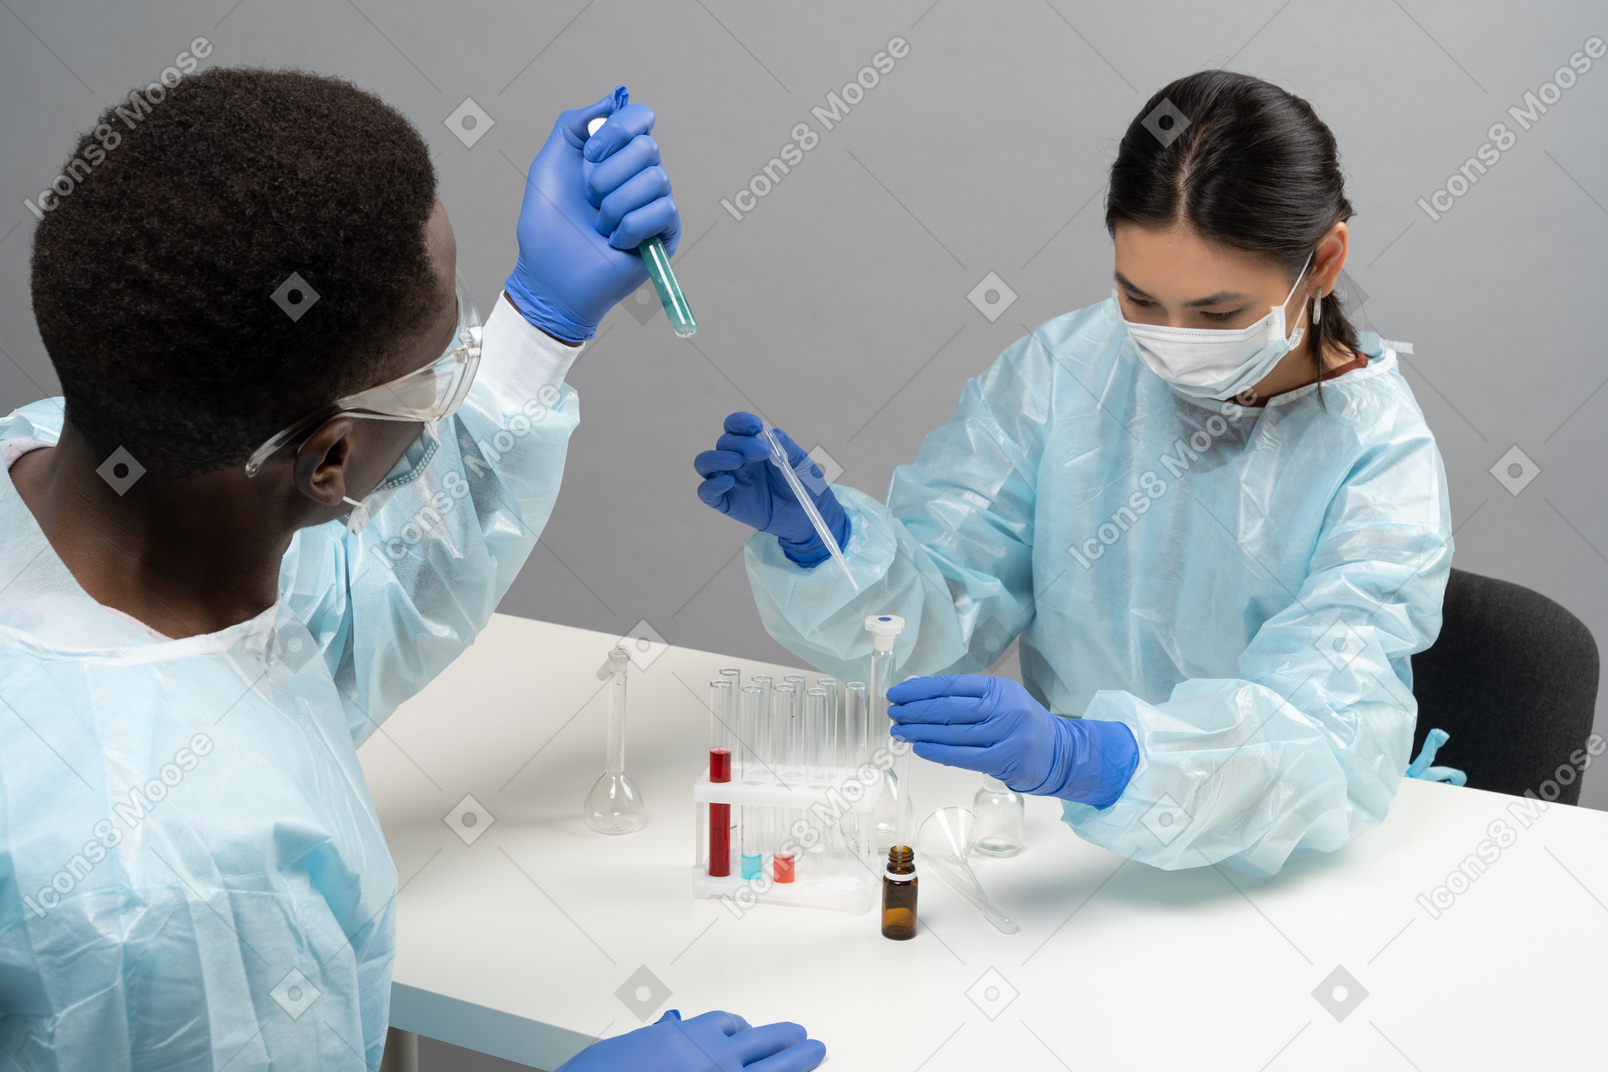 Two colleagues in medical laboratory